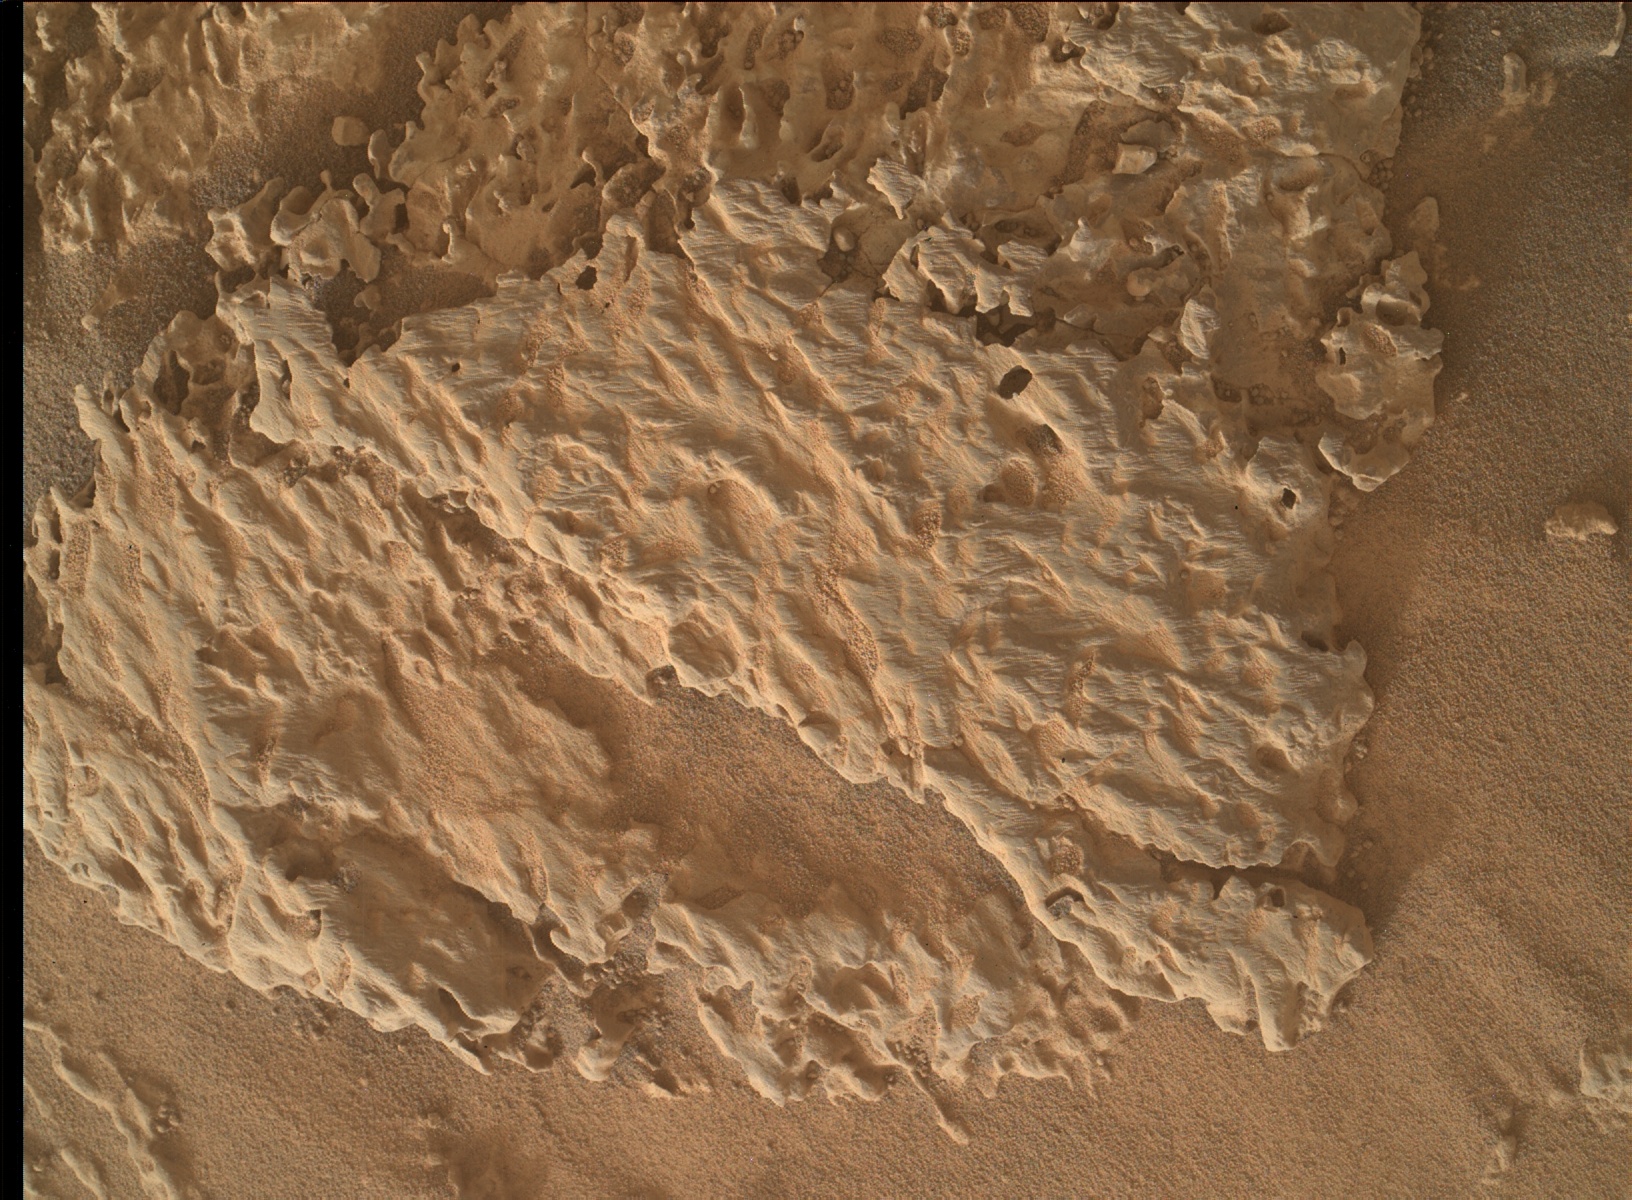 Pale orange terrain on the surface of Mars, with a sandy area creating a reverse 